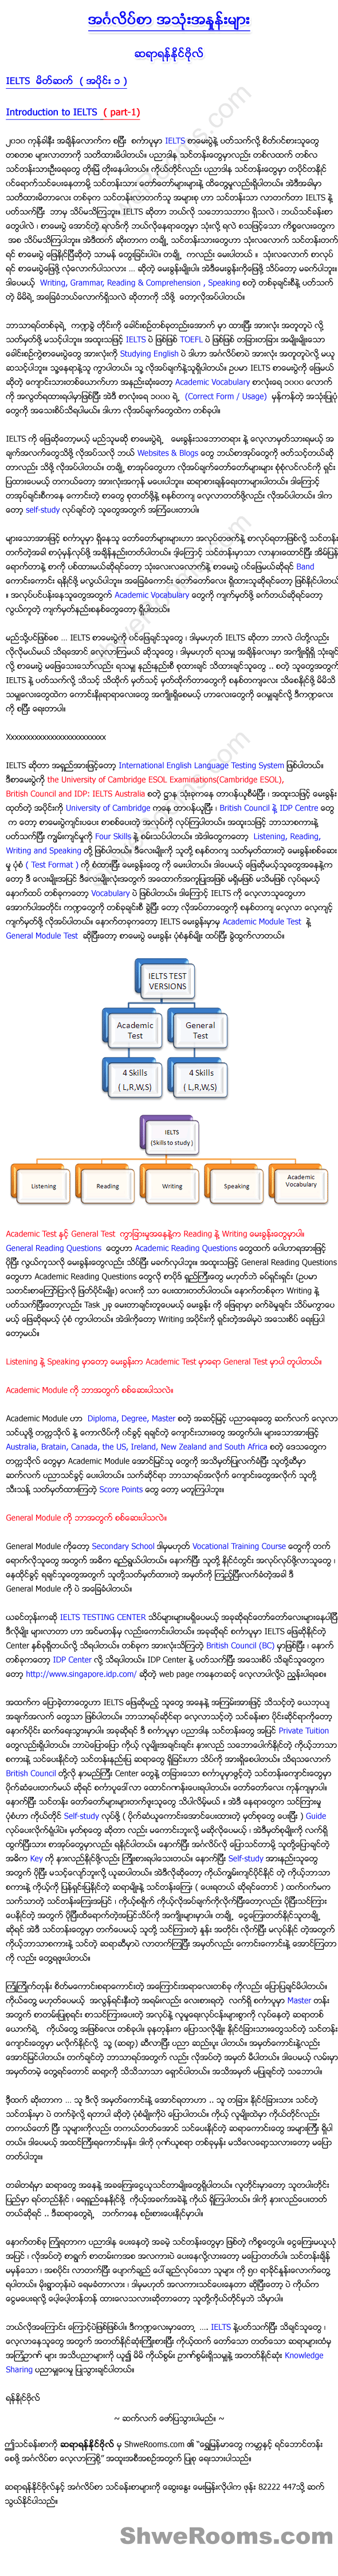 Lesson 24: Introduction to IELTS (Part 1).  In this English lesson, Sayar Yan Naing Bo introduces IELTS to learners of English. He mentions the difference between Acedamic and General Test of IELTS. And he also gives the useful website of IELTS Centers so that you can browse and learn more about IELTS. Enjoy learning! 